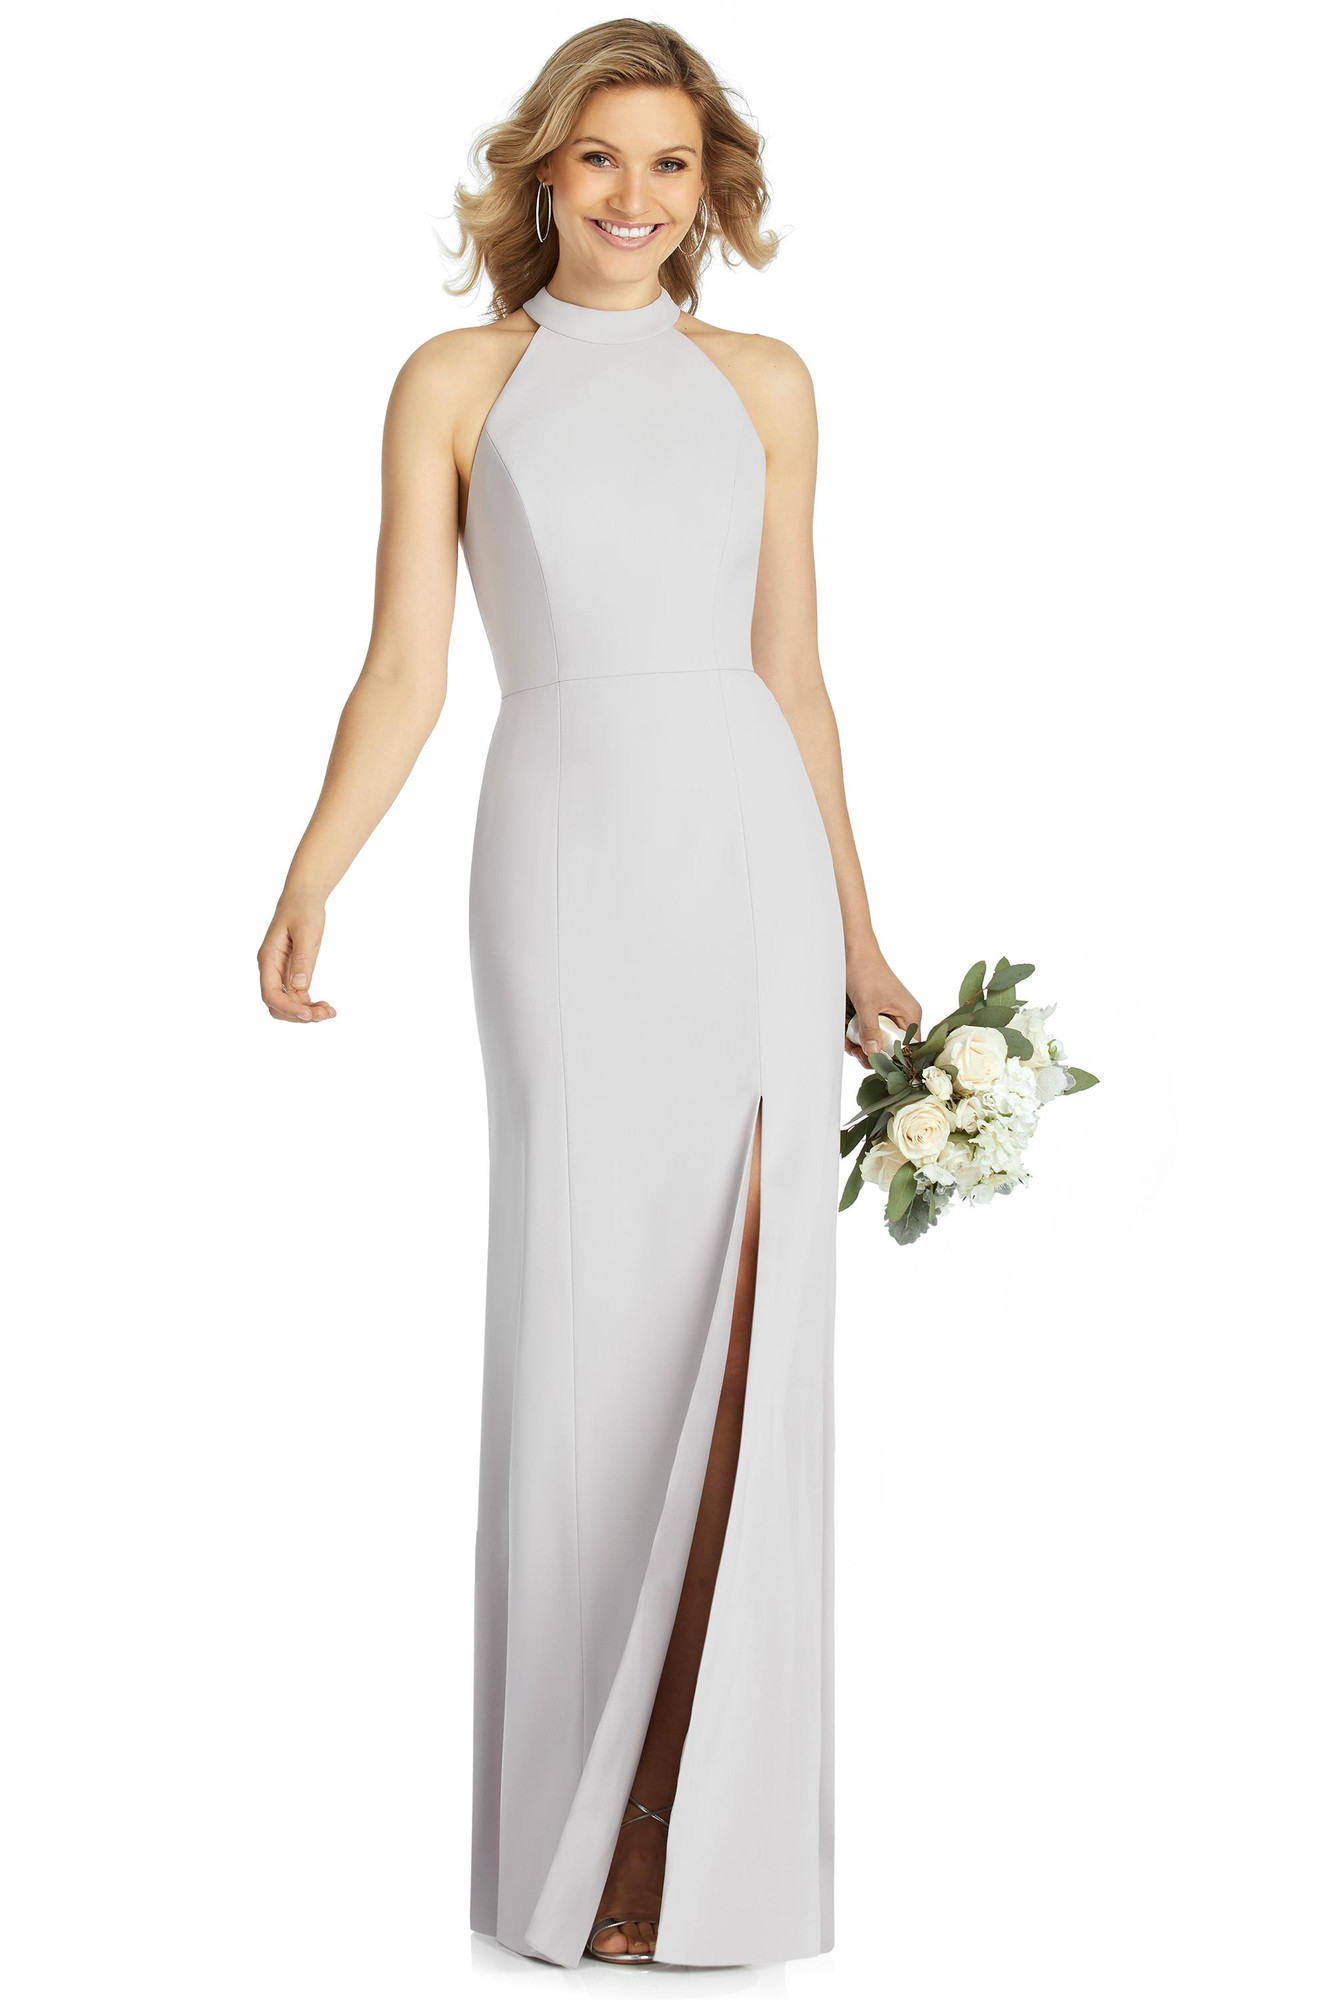 6808 Bridesmaid Dress from Dessy Collection hitched.co.uk